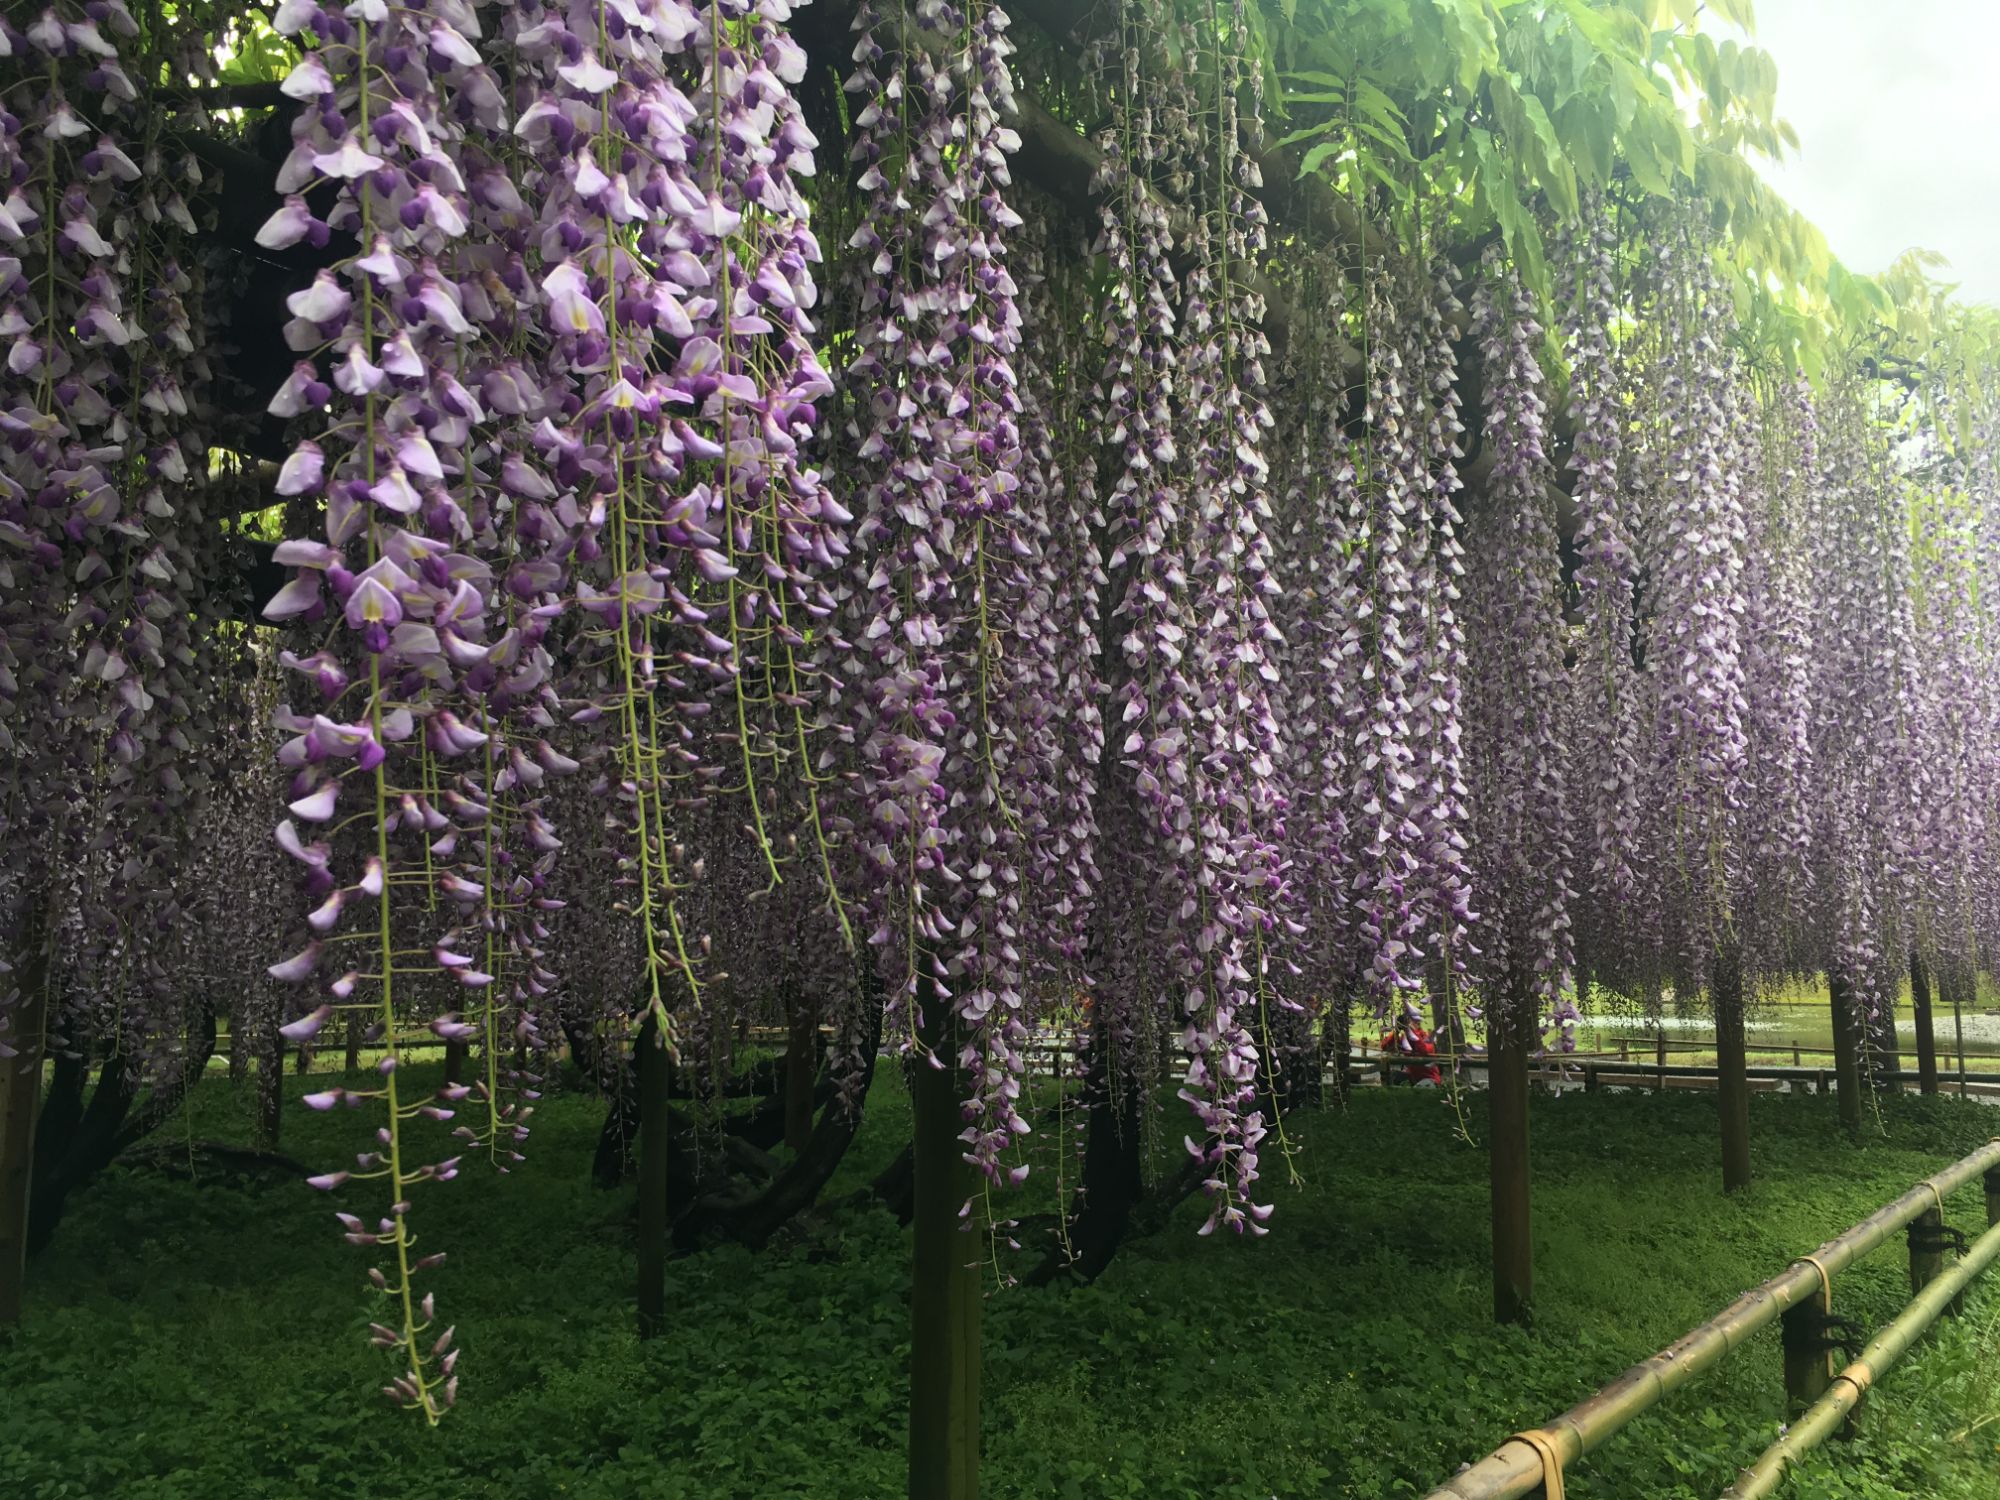 Fuji wisteria flowers at Byodo-in Temple in Kyoto City, Japan.